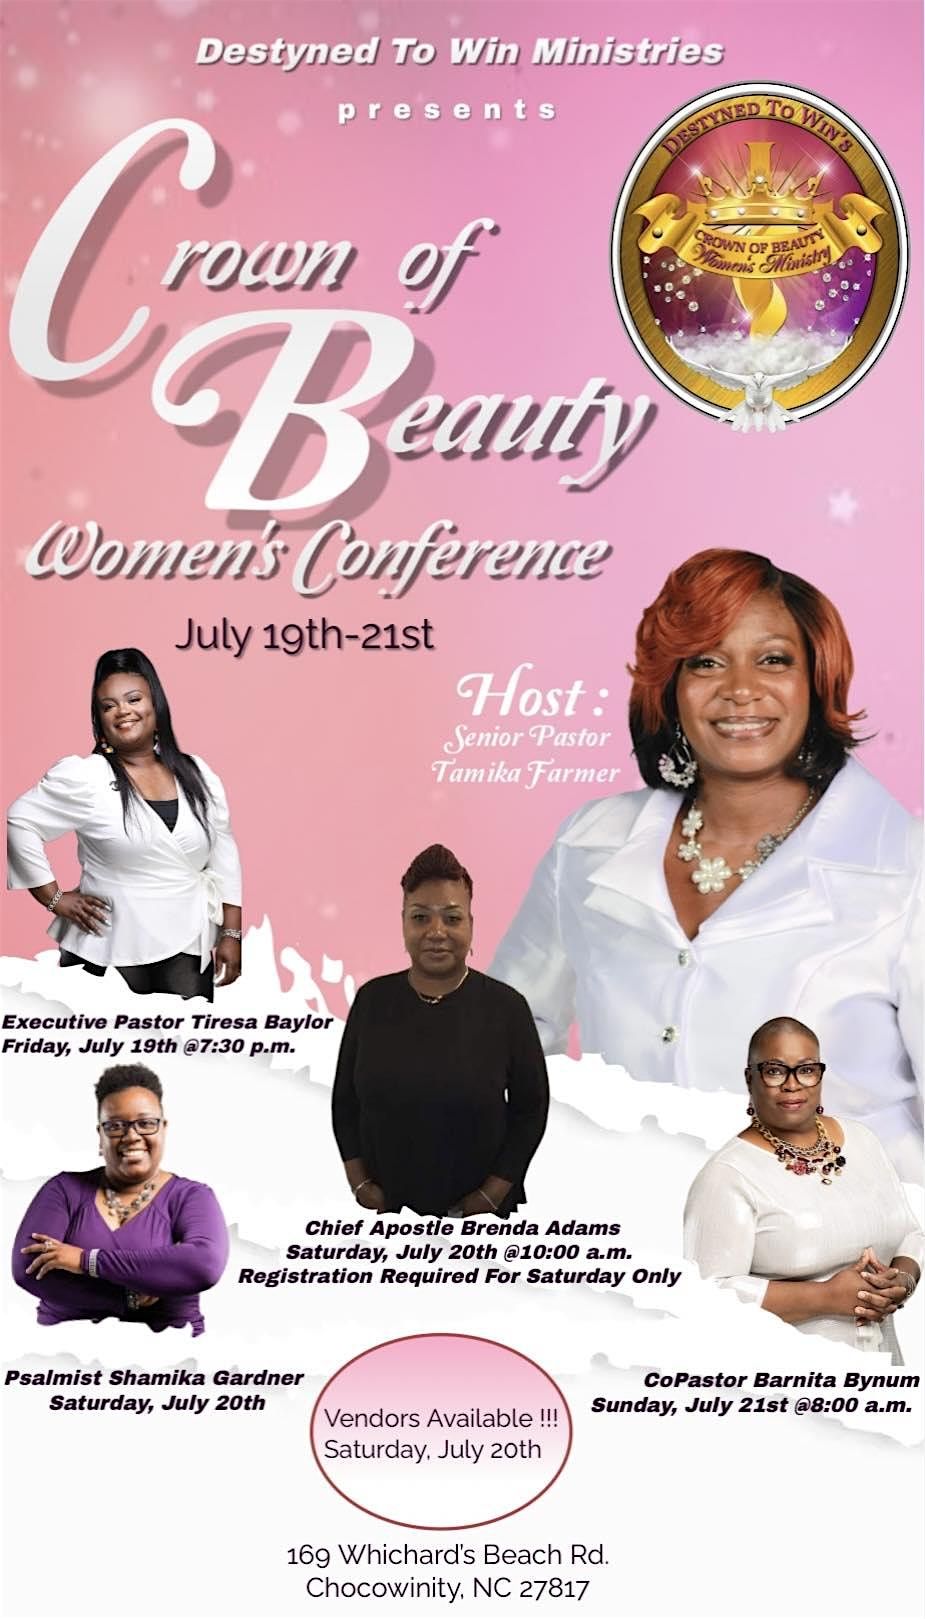 DTW's Crown of Beauty Annual Women's Conference